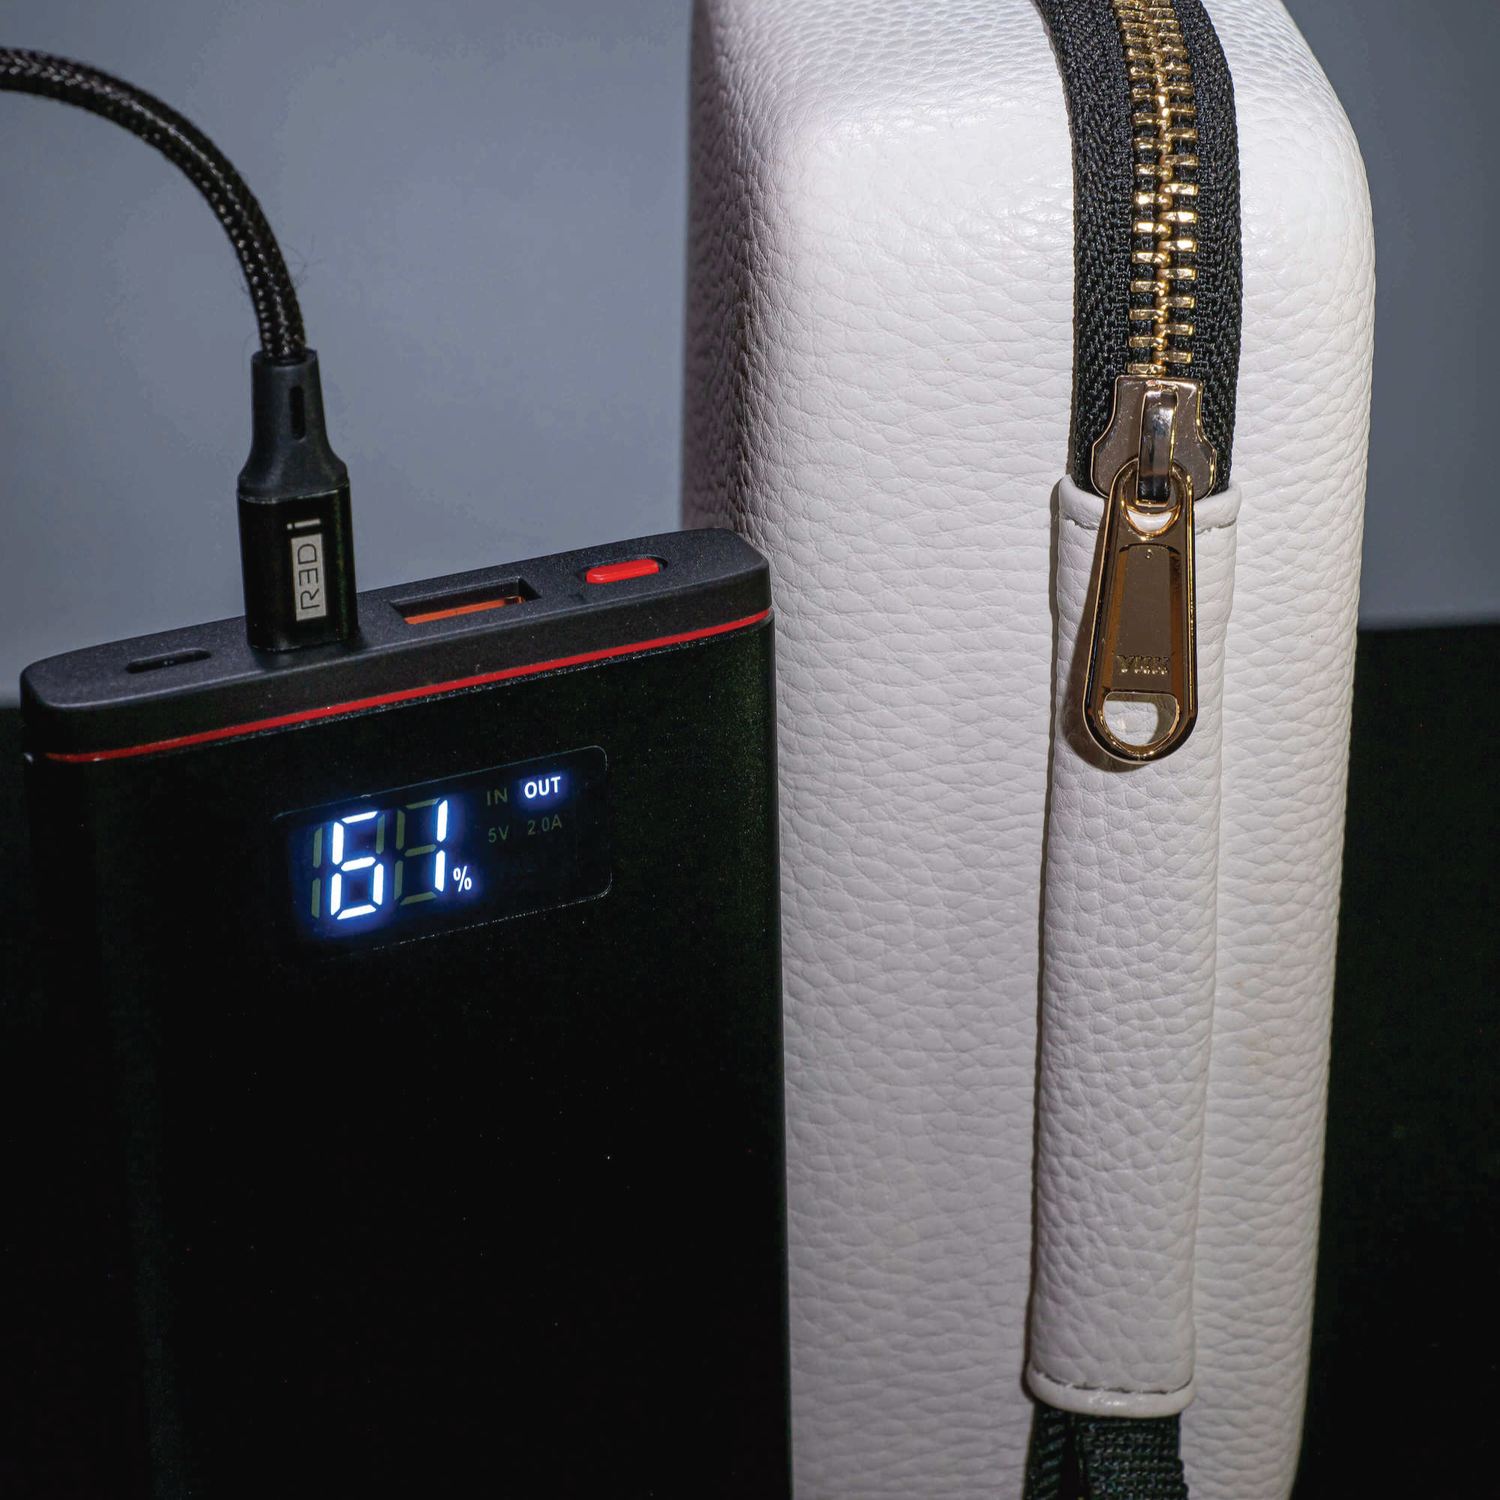 Our power bank has now been UL tested with approved battery cells so even better performance.